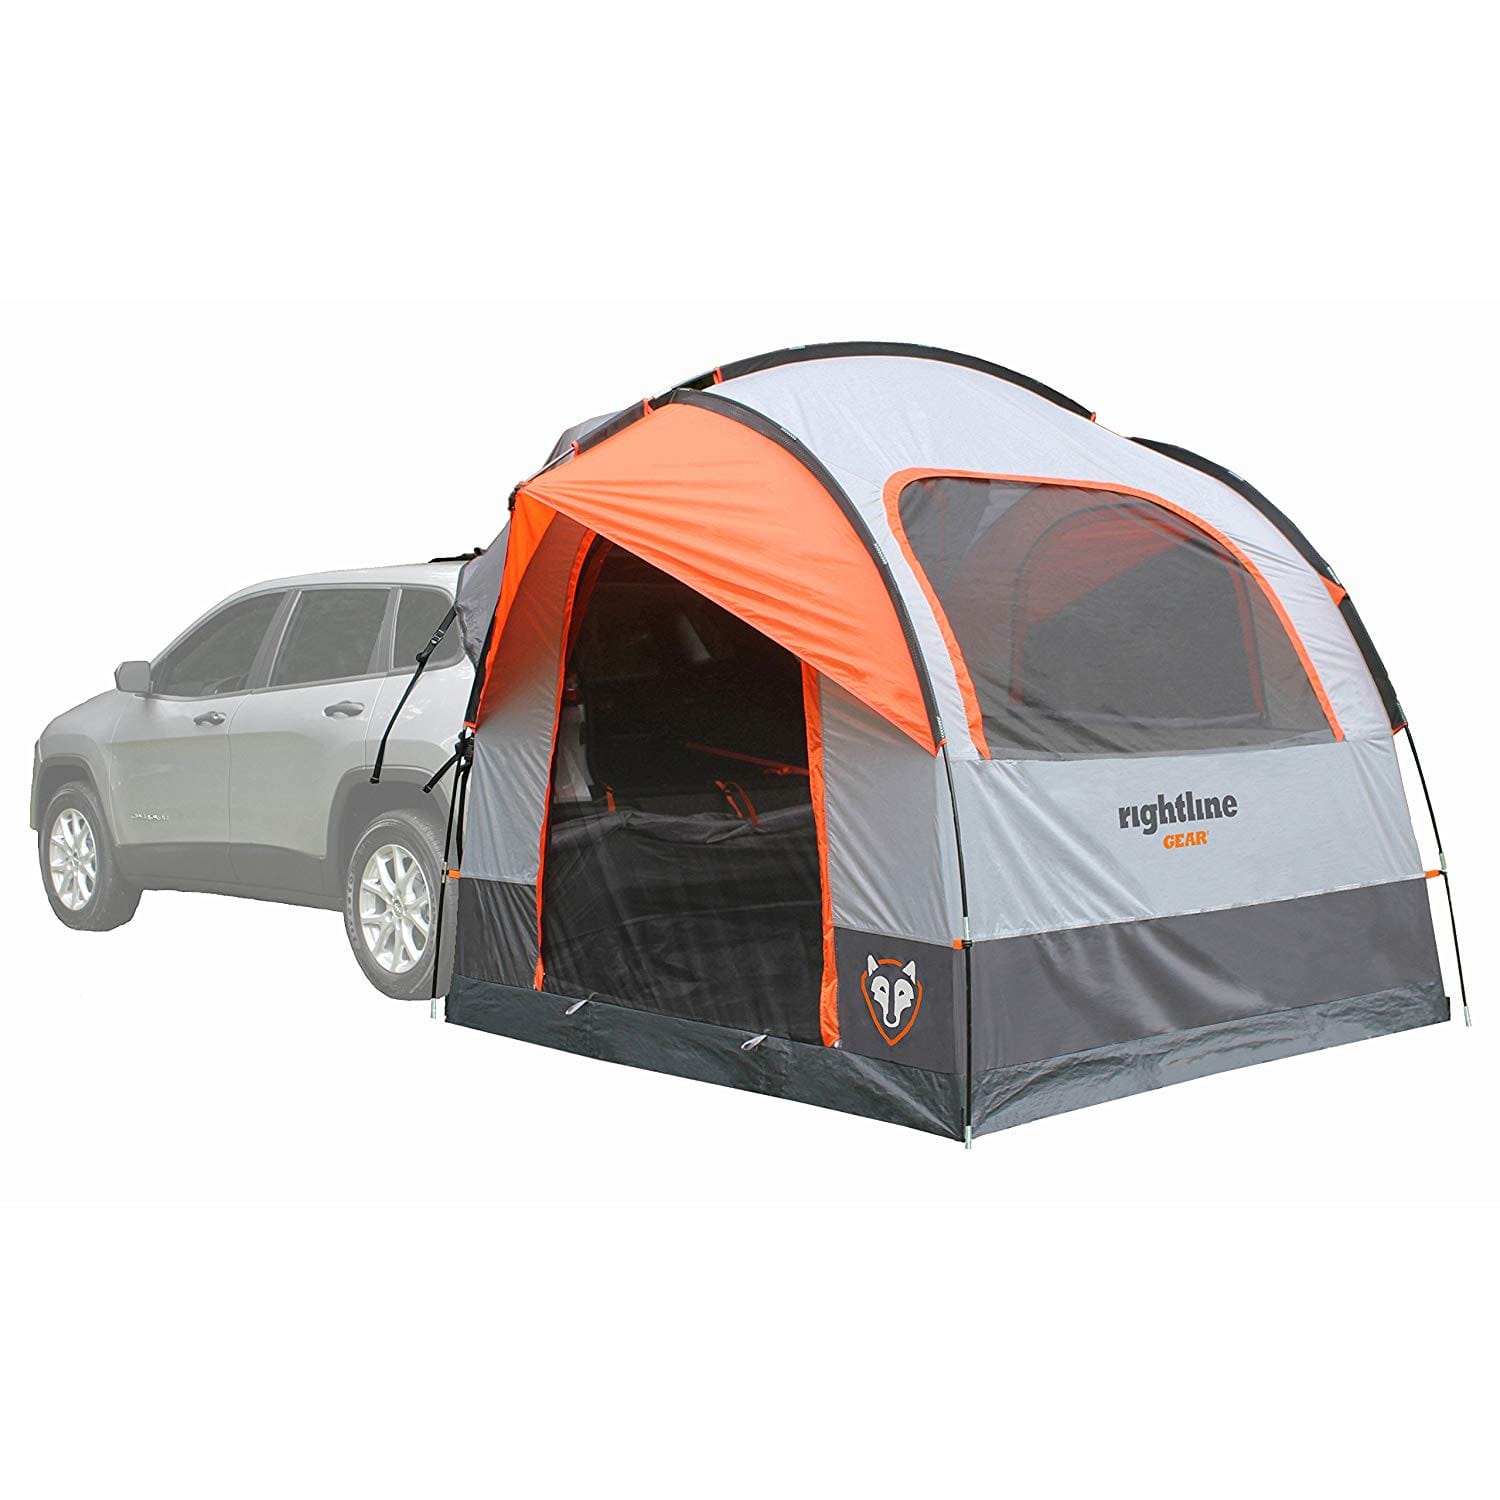 Car Camping Gear: Top 29 Best Products for Car Camping - 2023 Edition